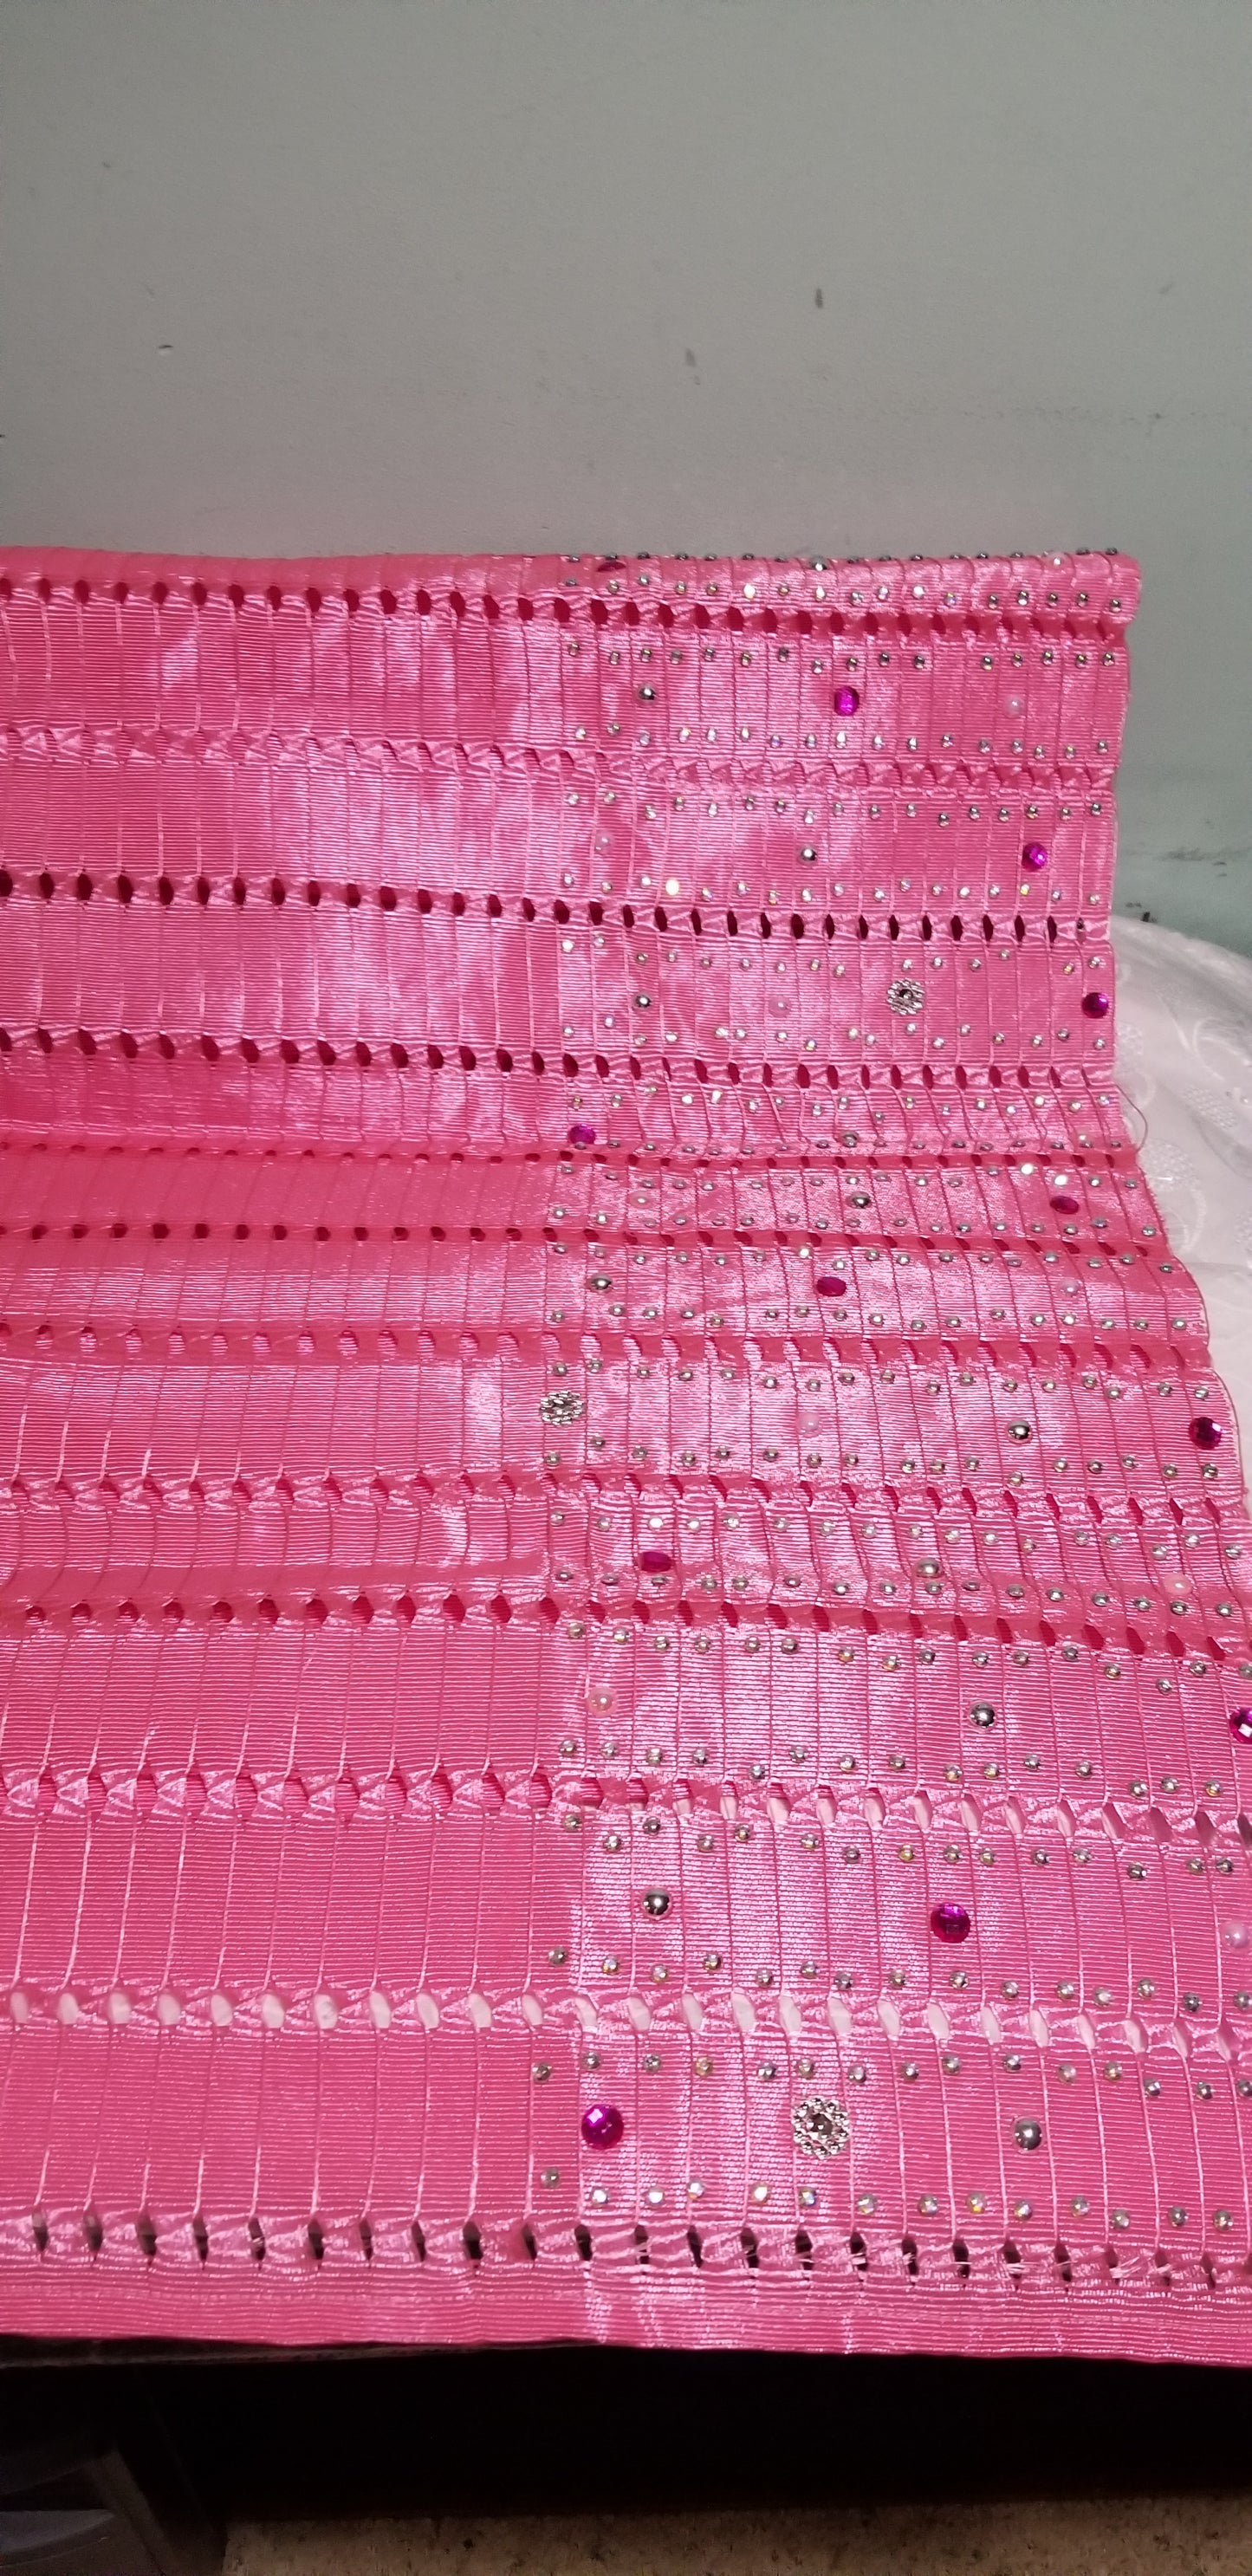 Quality Pink Nigerian aso-oke for making Gele. Latest design beaded and stoned border for making Nigerian party Gele. Sold as one piece in a bag for gele